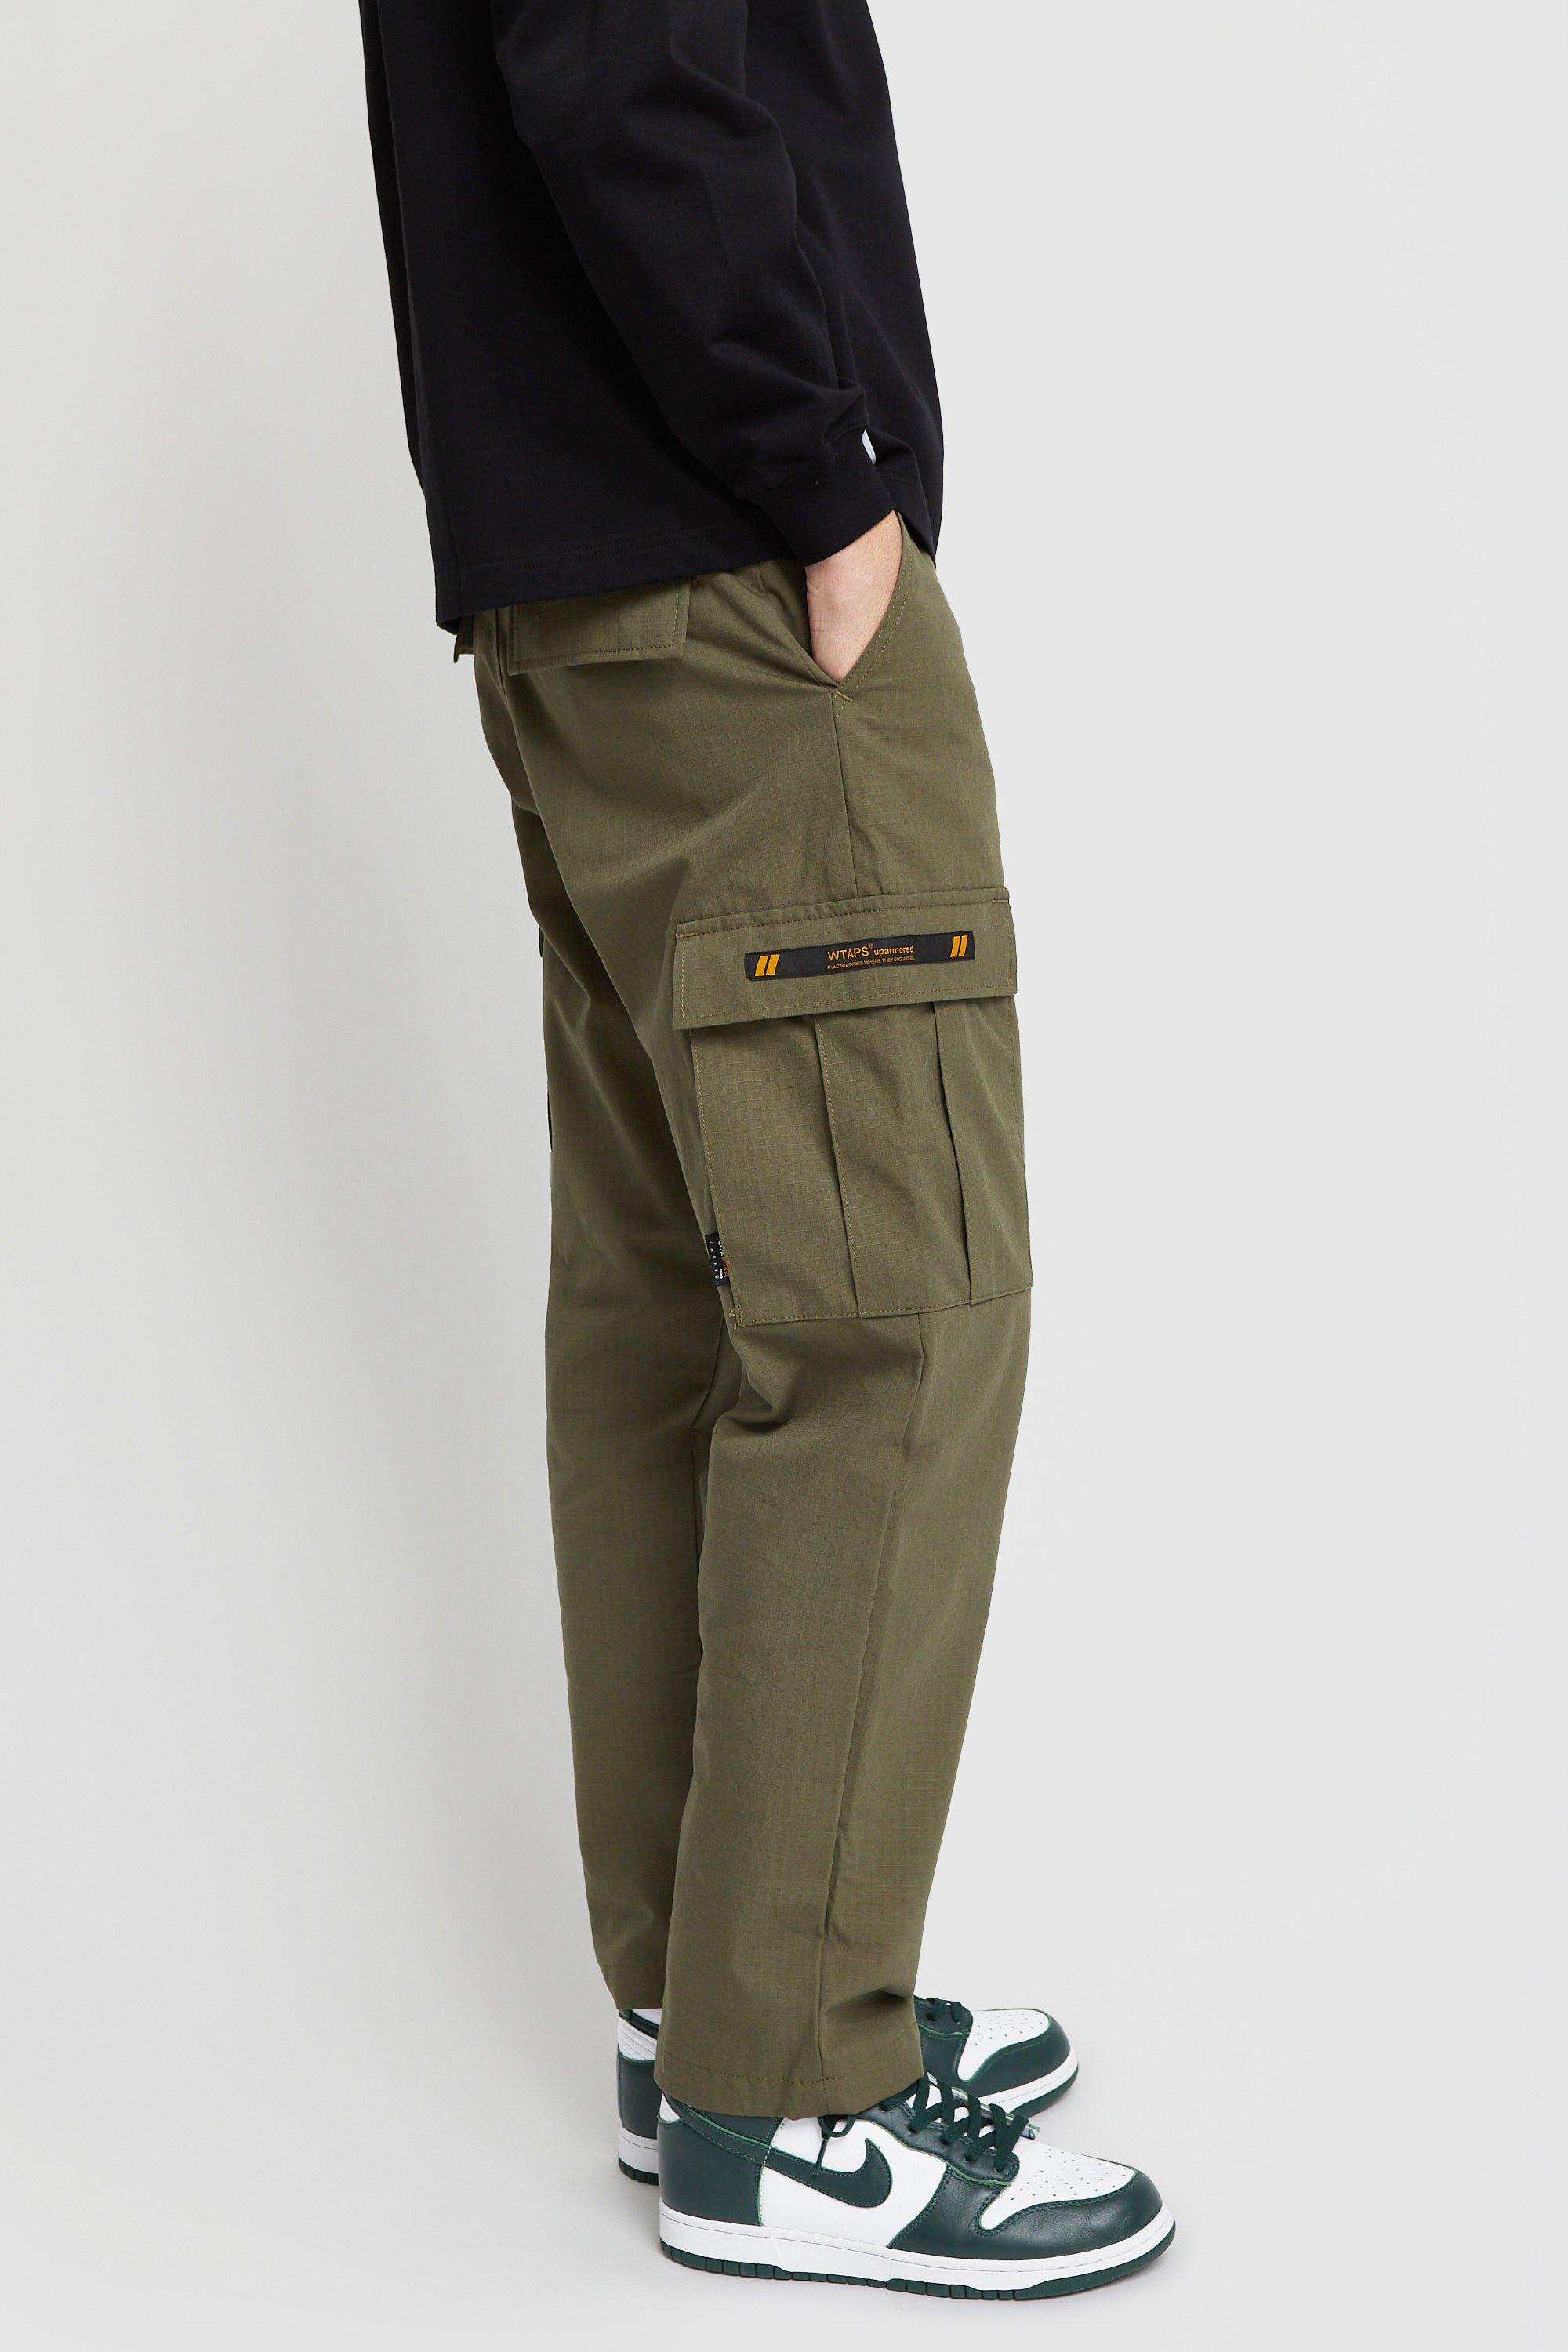 JUNGLESTOCKT22AW WTAPS JUNGLE STOCK TROUSERS RIPSTOP - ワーク ...